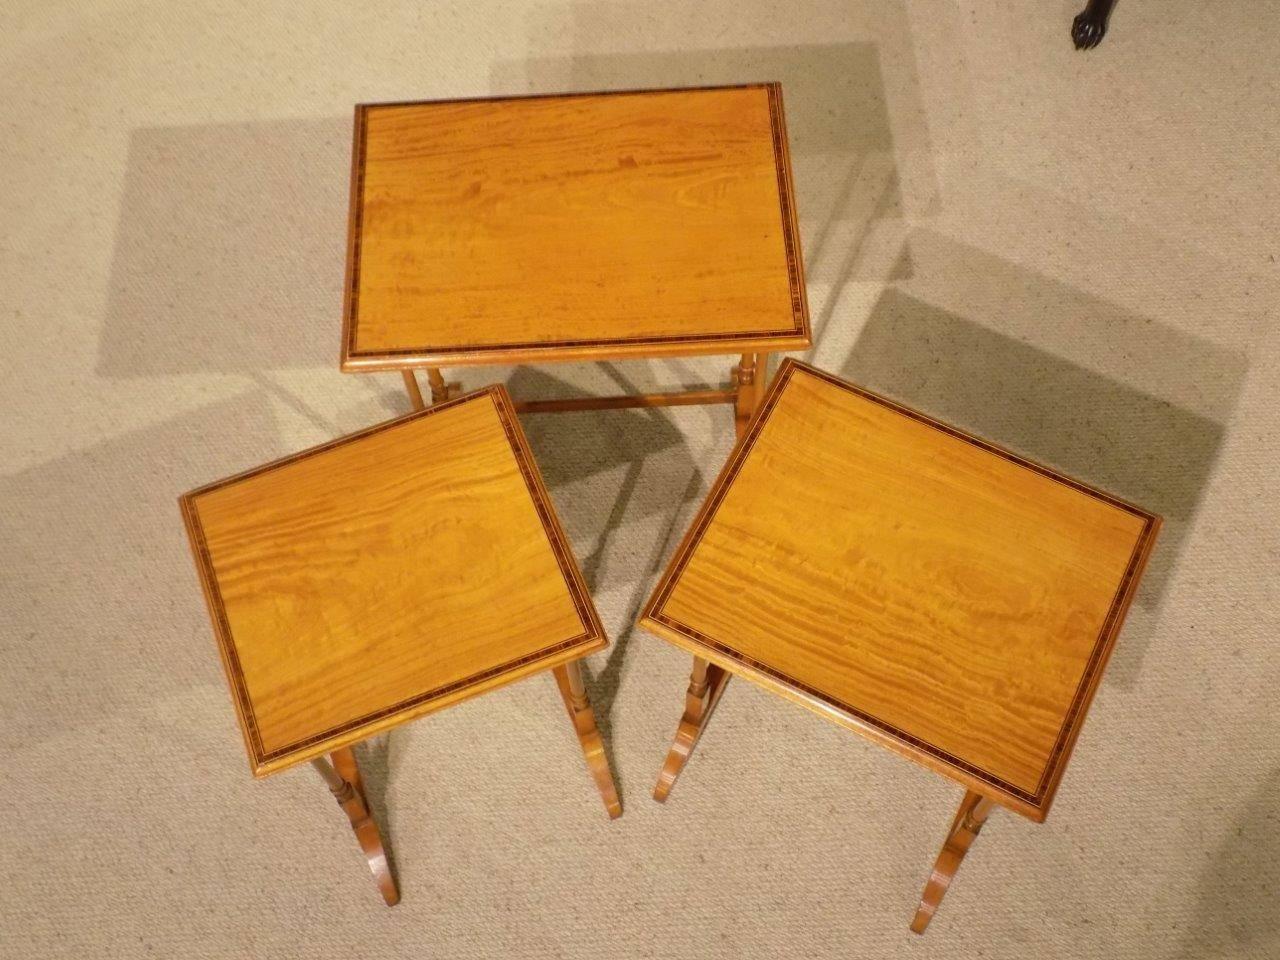 Early 20th Century Satinwood Edwardian Period Antique Nest of Three Tables